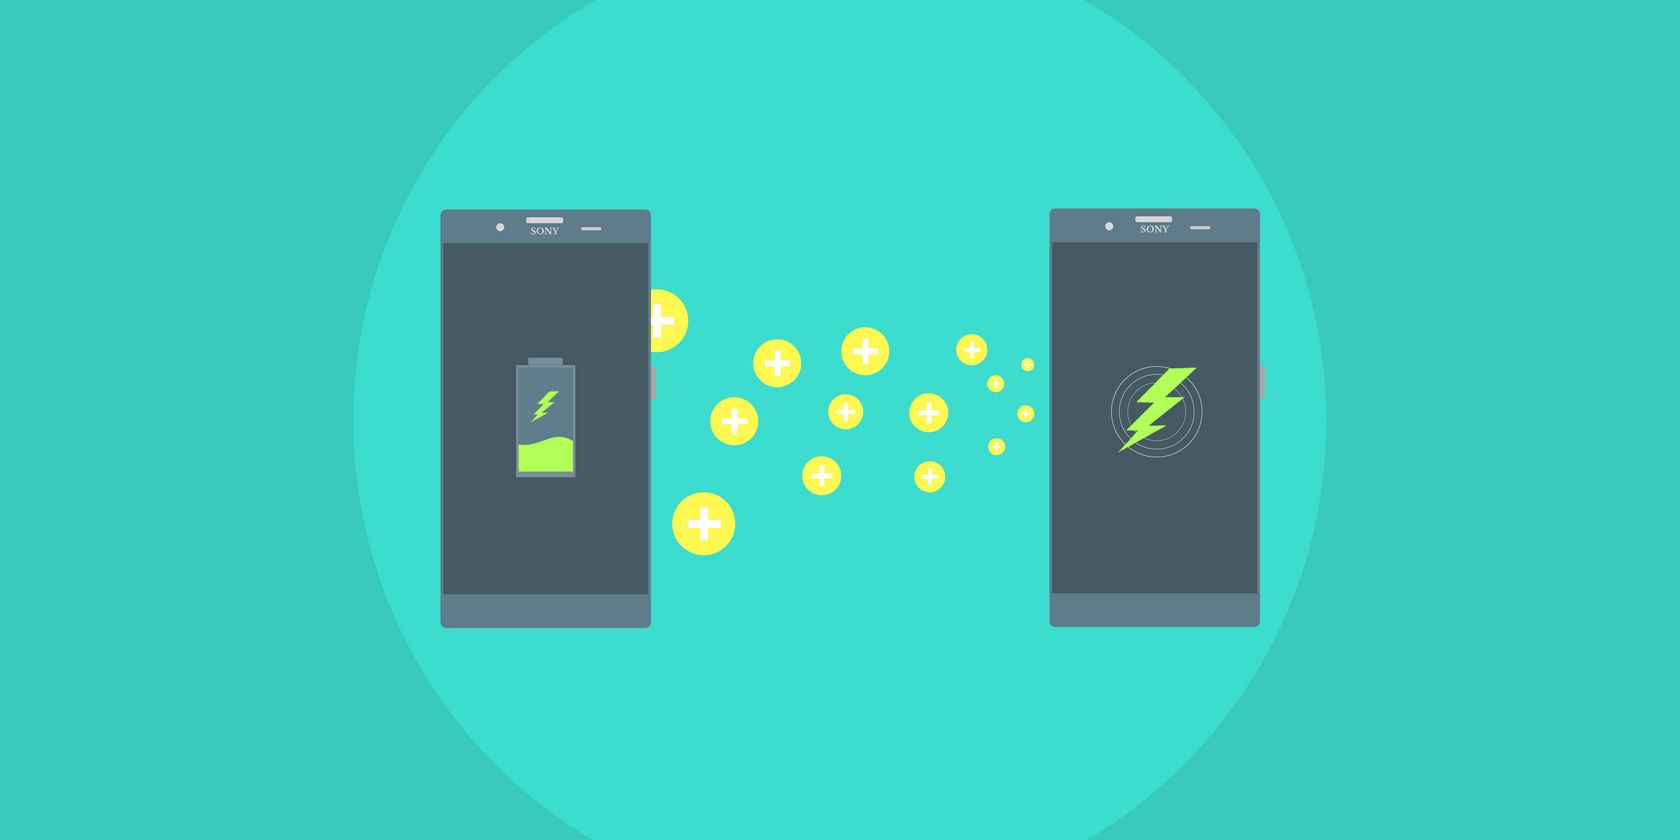 An image with two Android phones depicting low battery and charging signs